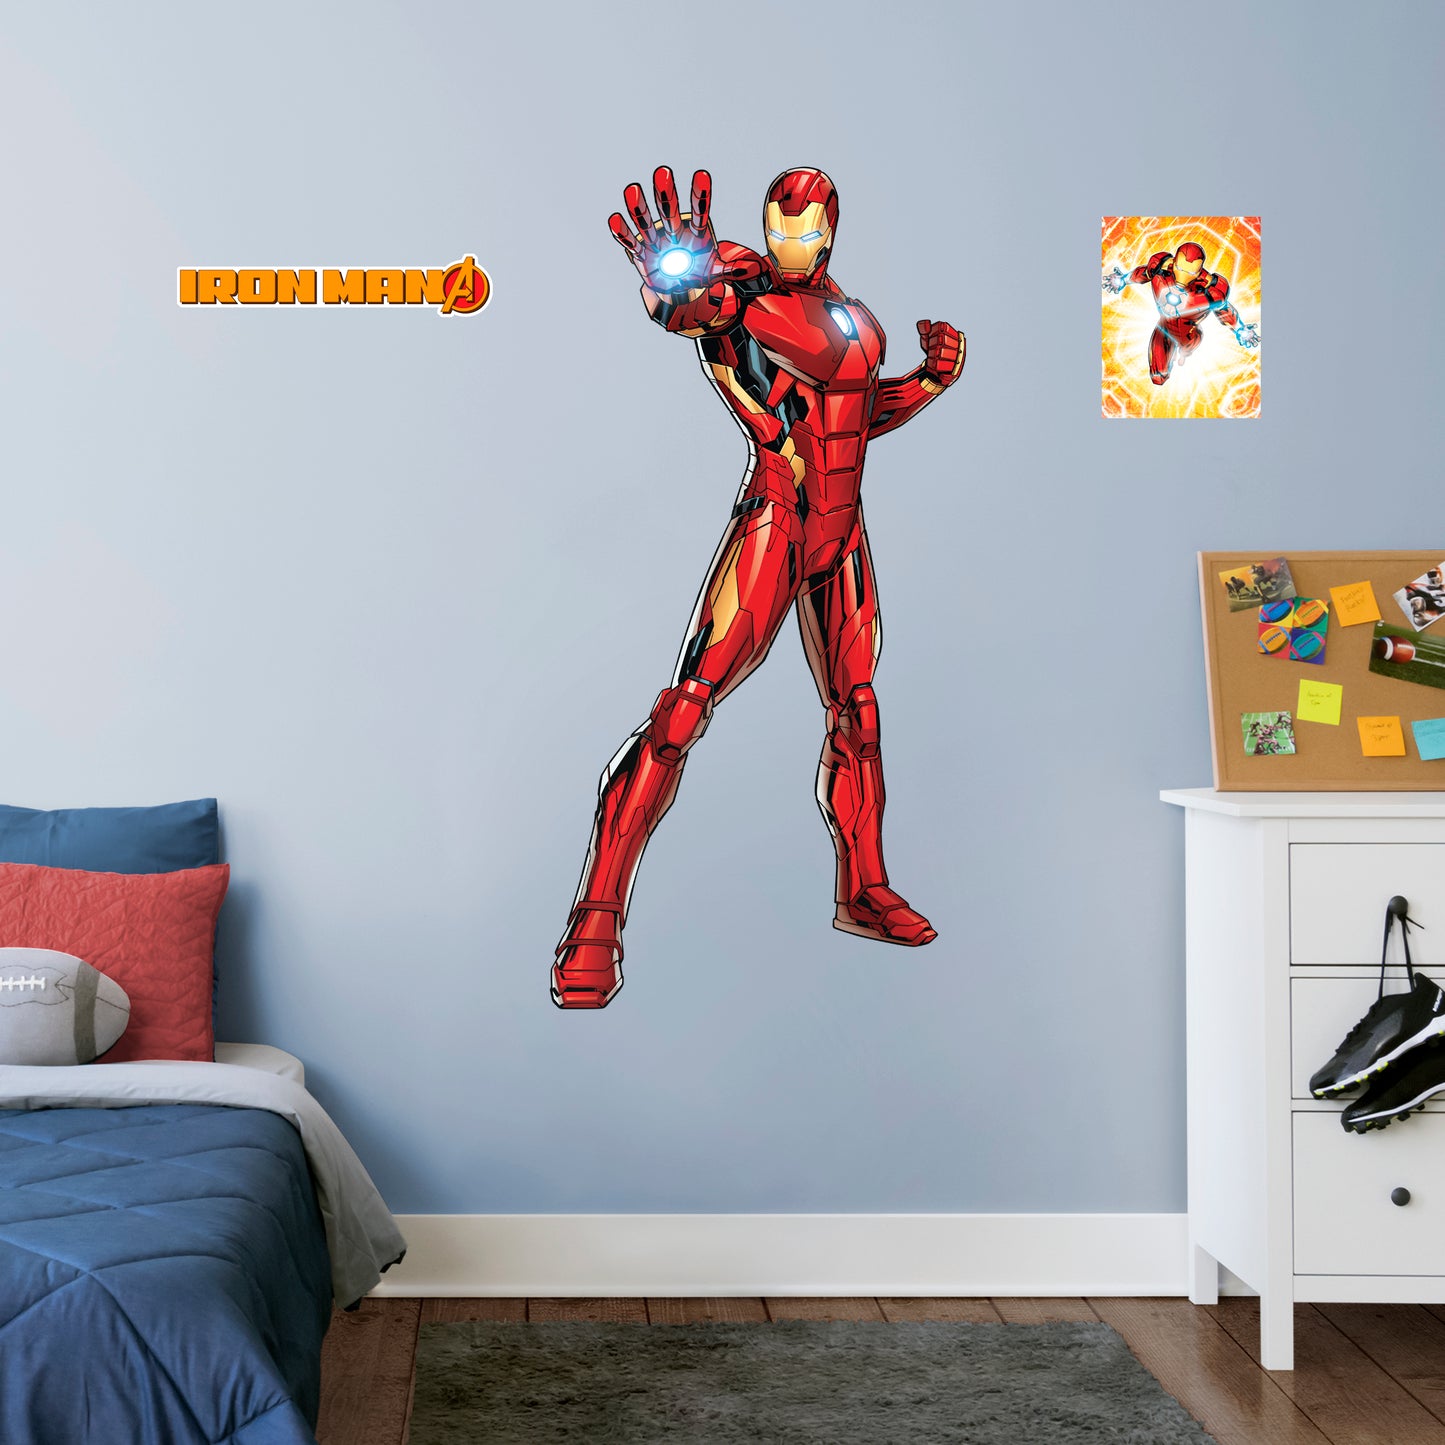 Giant Character + 2 Decals (25"W x 51"H)